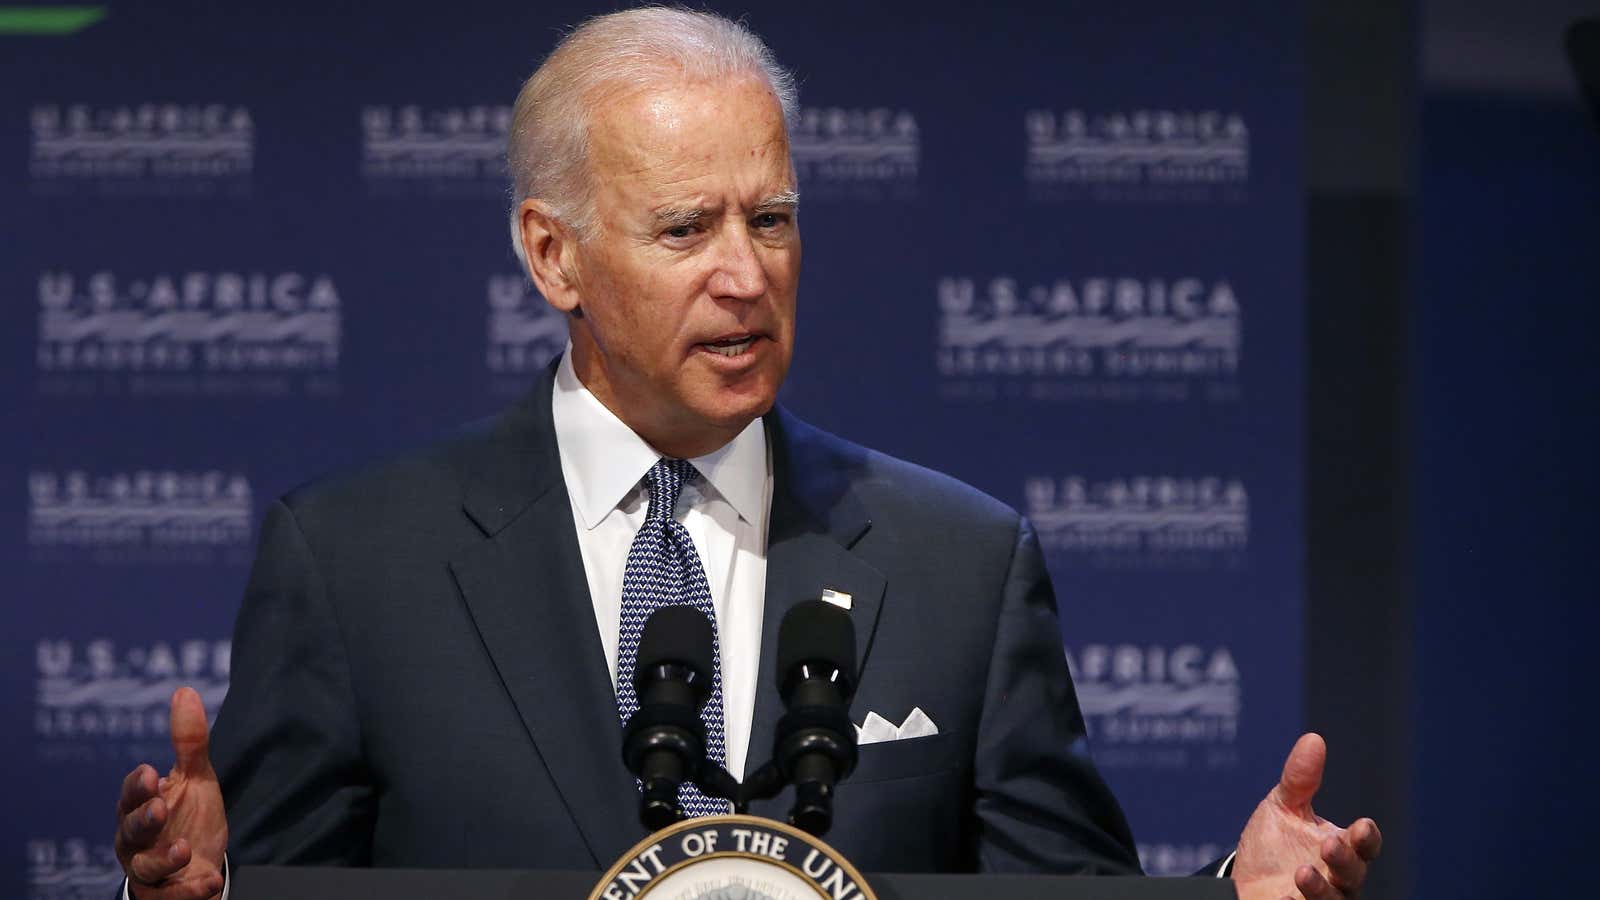 Then vice president Joe Biden addresses a civil society forum during the US-Africa Leaders Summit in Washington Aug. 4, 2014.